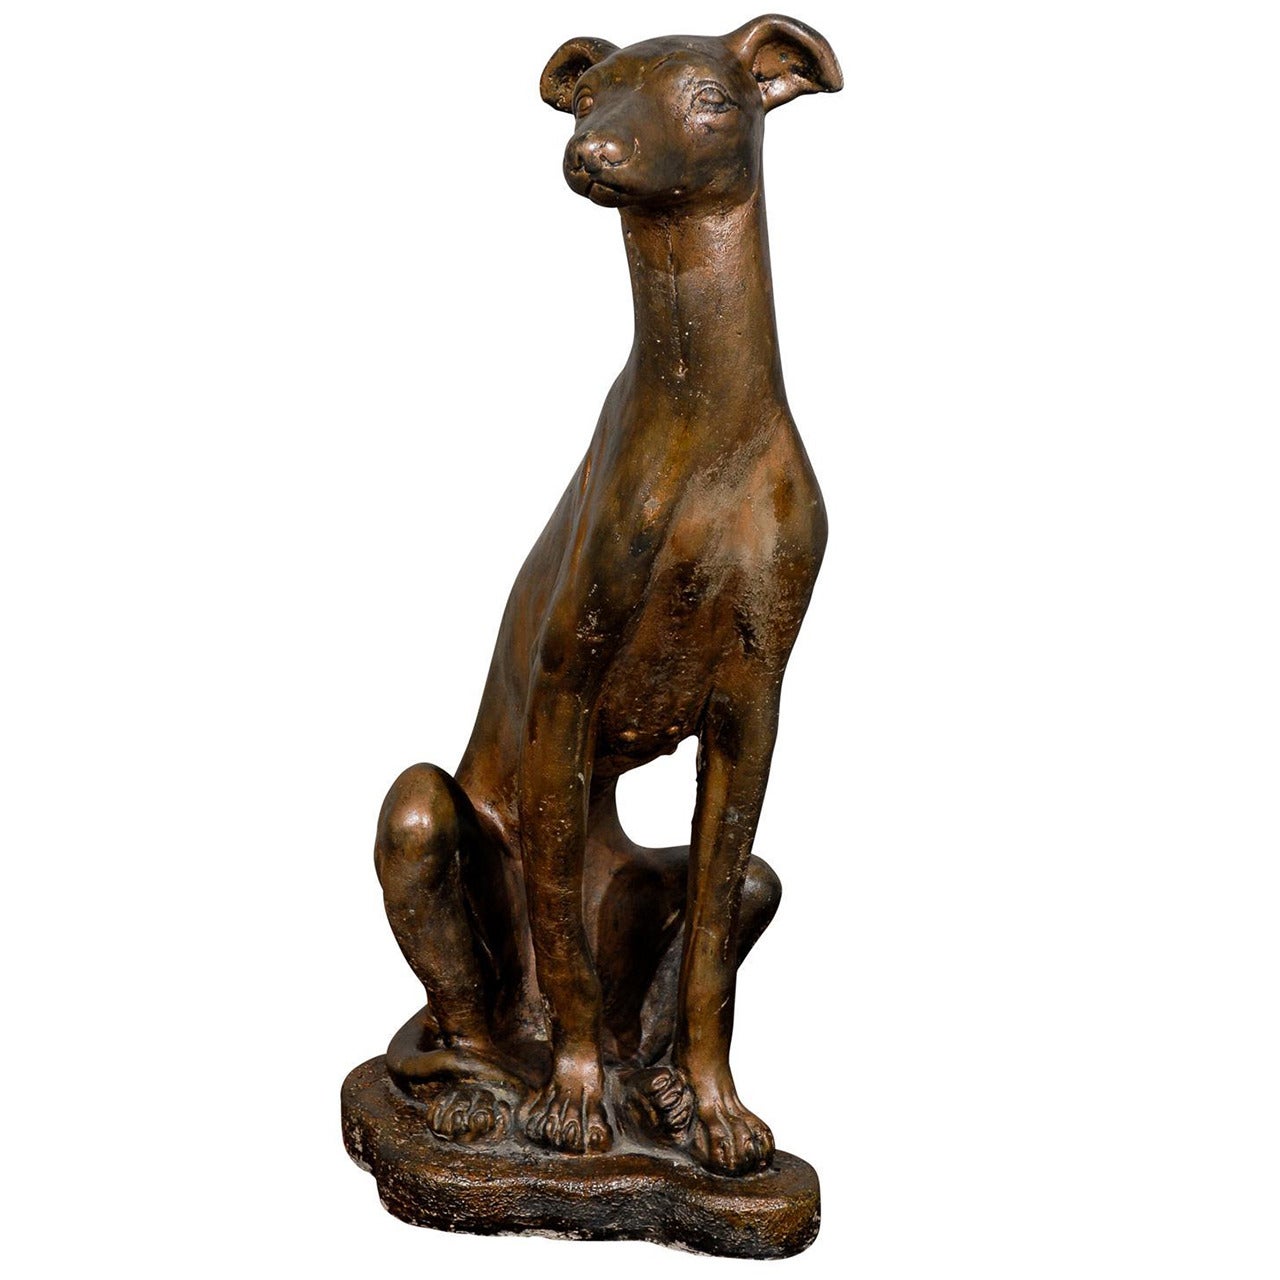 Whippet Dog Statue in a Bronze Finish